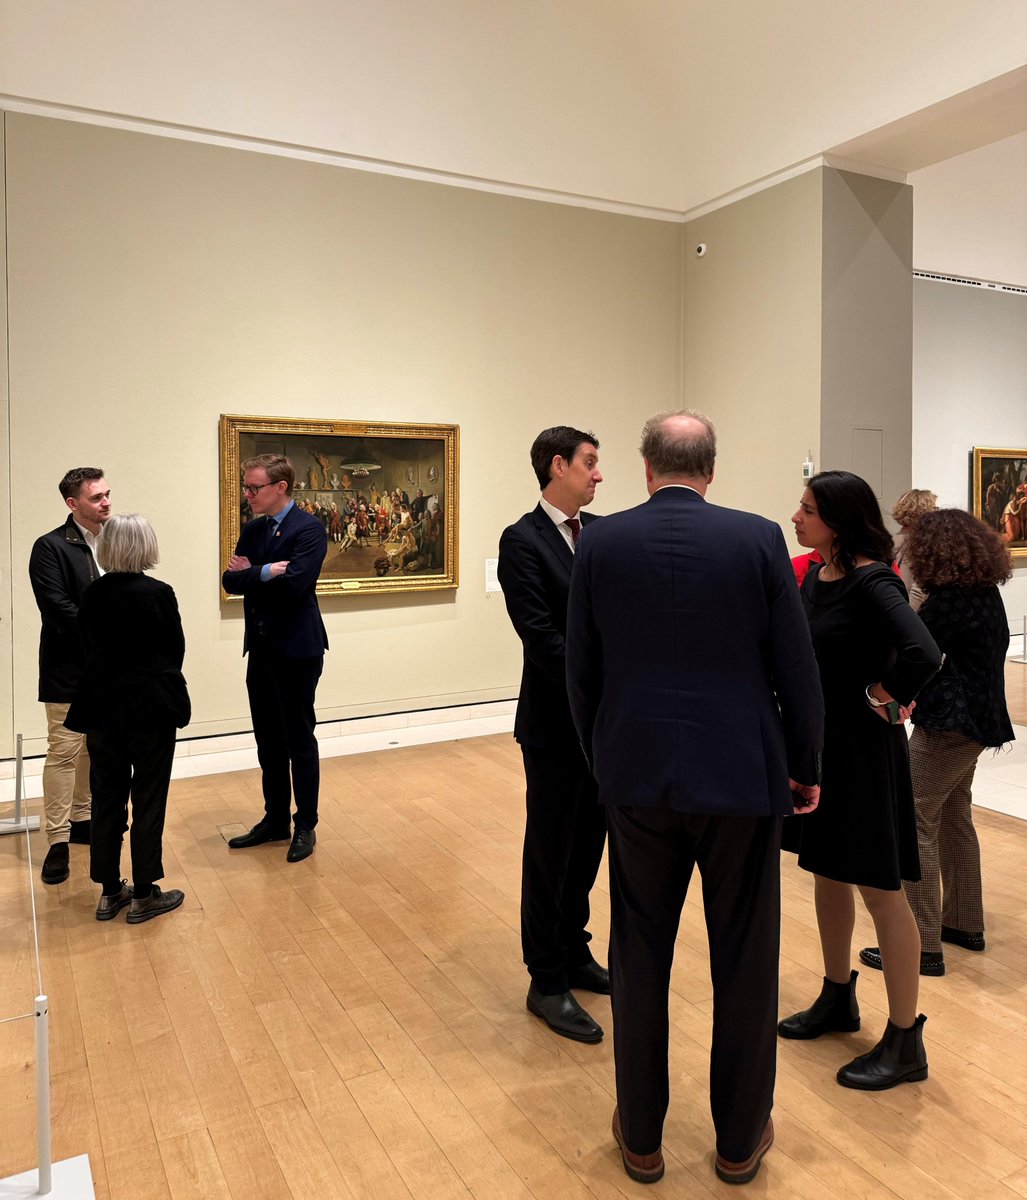 Swiss painter Angelica Kauffman was one of only 2 female founding members of the @royalacademy & one of Europe's most celebrated 18th century artists. Great pleasure to welcome guests & friends of #Switzerland to the RA for a breakfast tour of the new exciting exhibition.